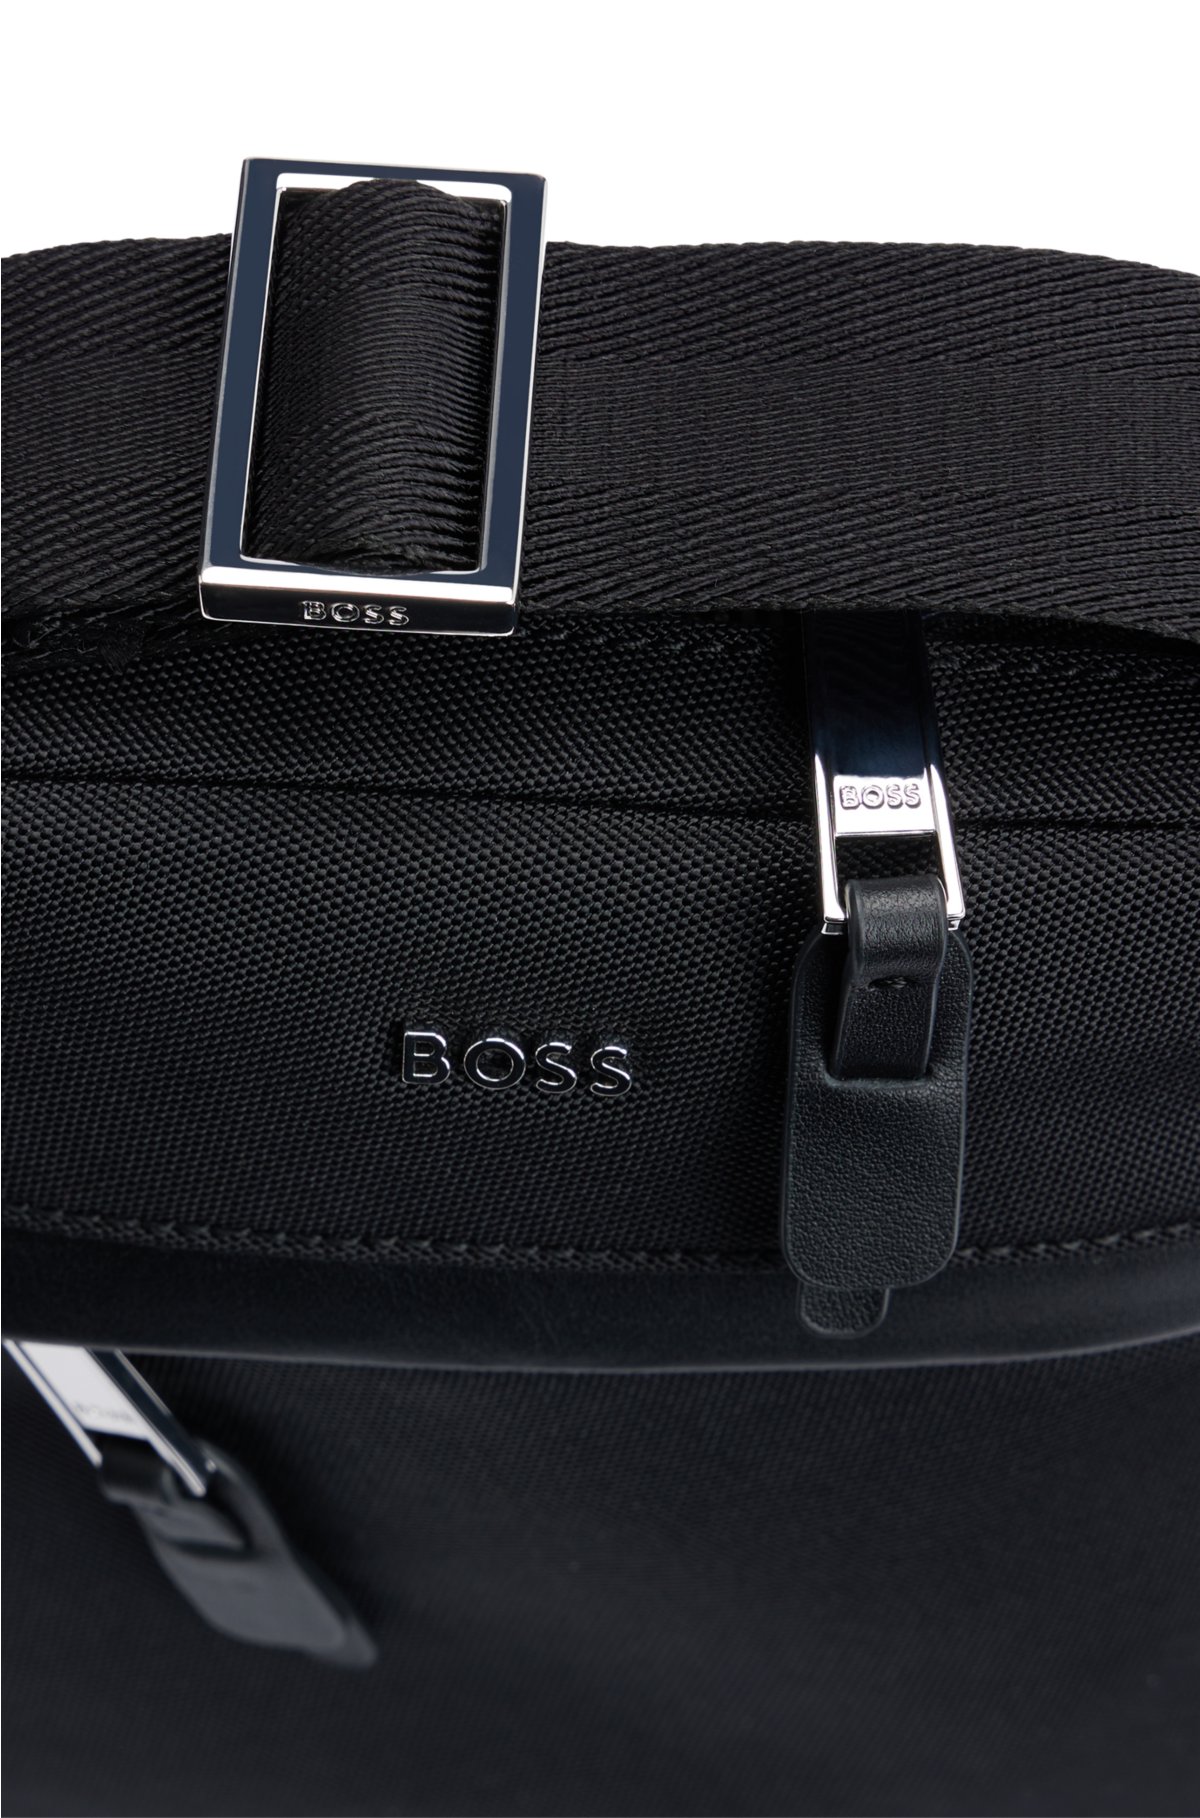 lettering Structured-material logo BOSS - reporter with bag